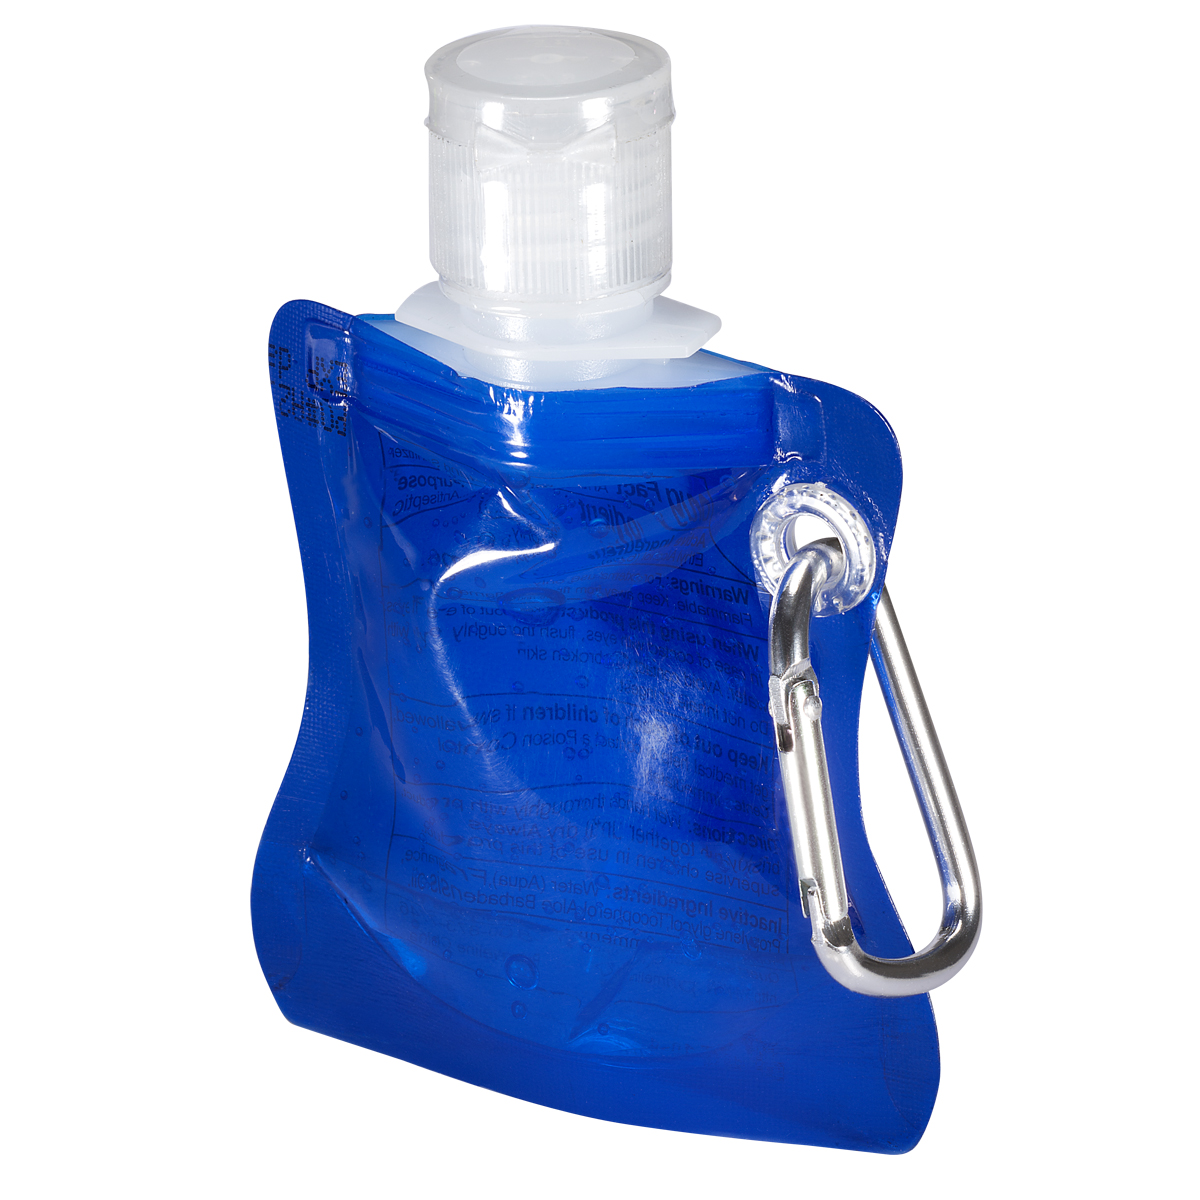 Collapsible Hand Sanitizer